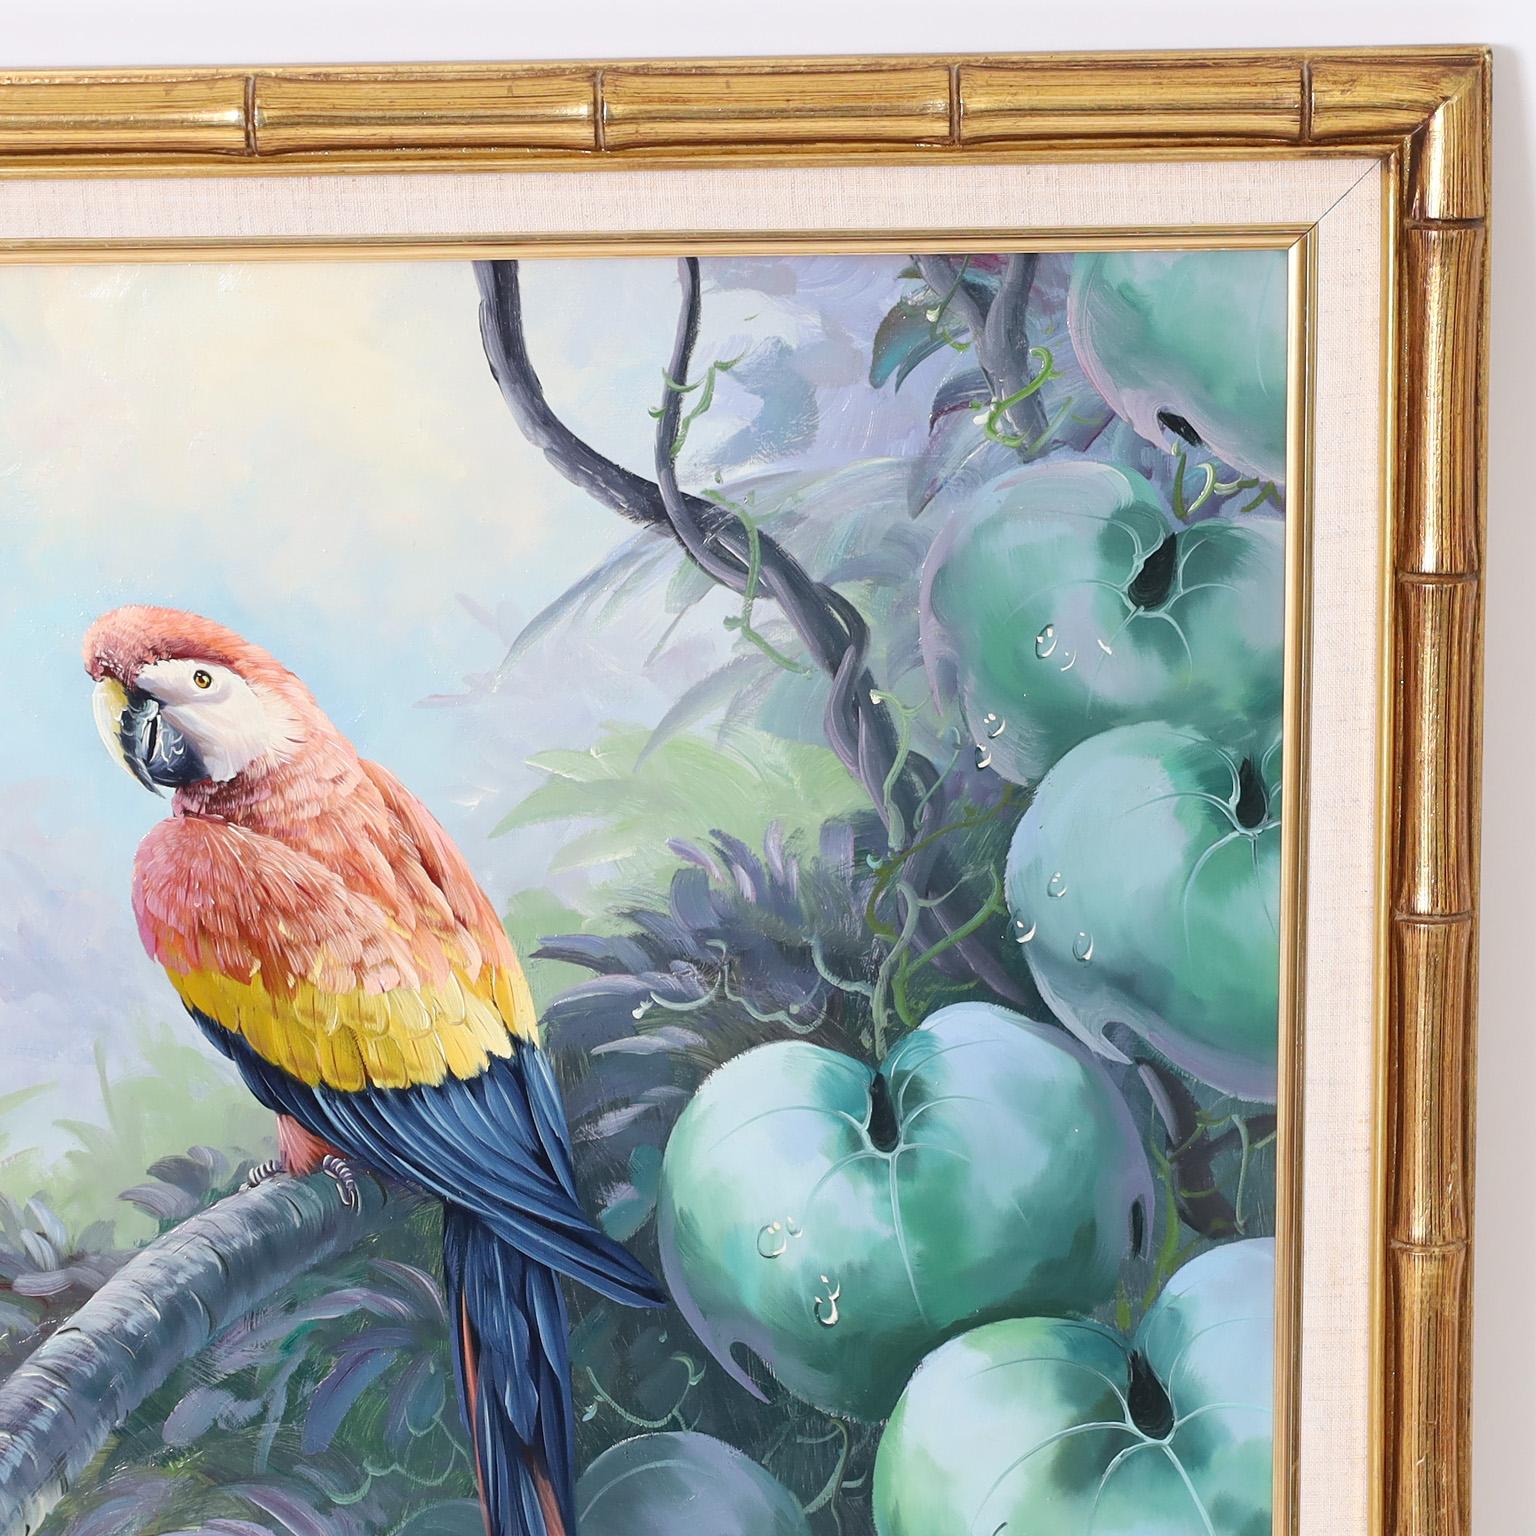 American Oil Painting on Canvas of Parrots For Sale